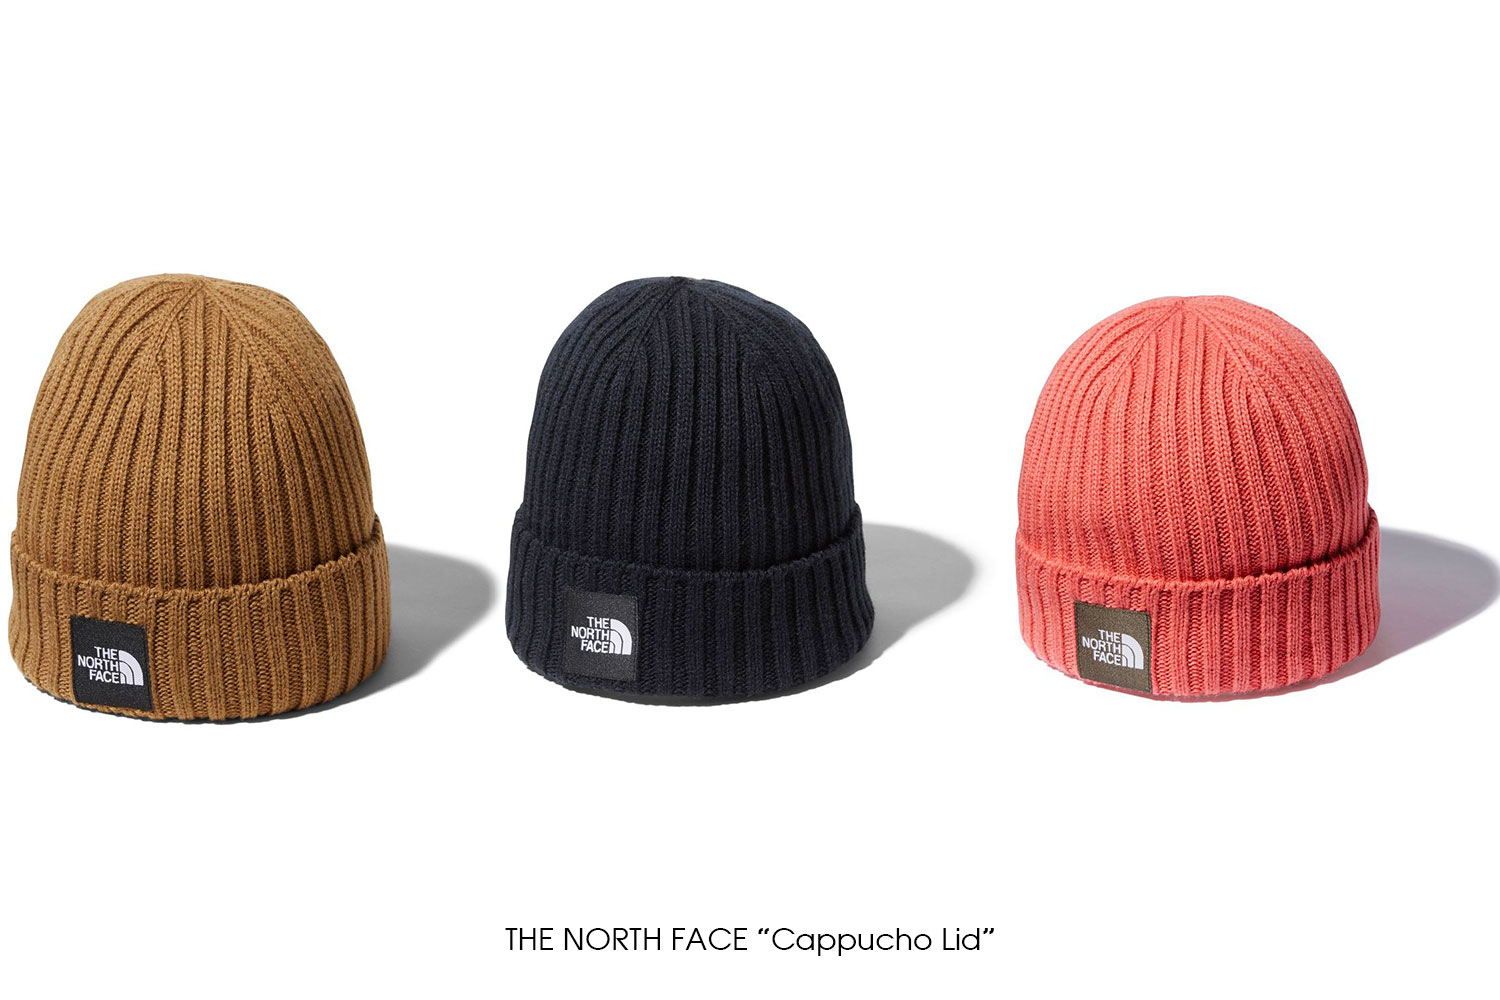 THE NORTH FACE "Cappucho Lid"